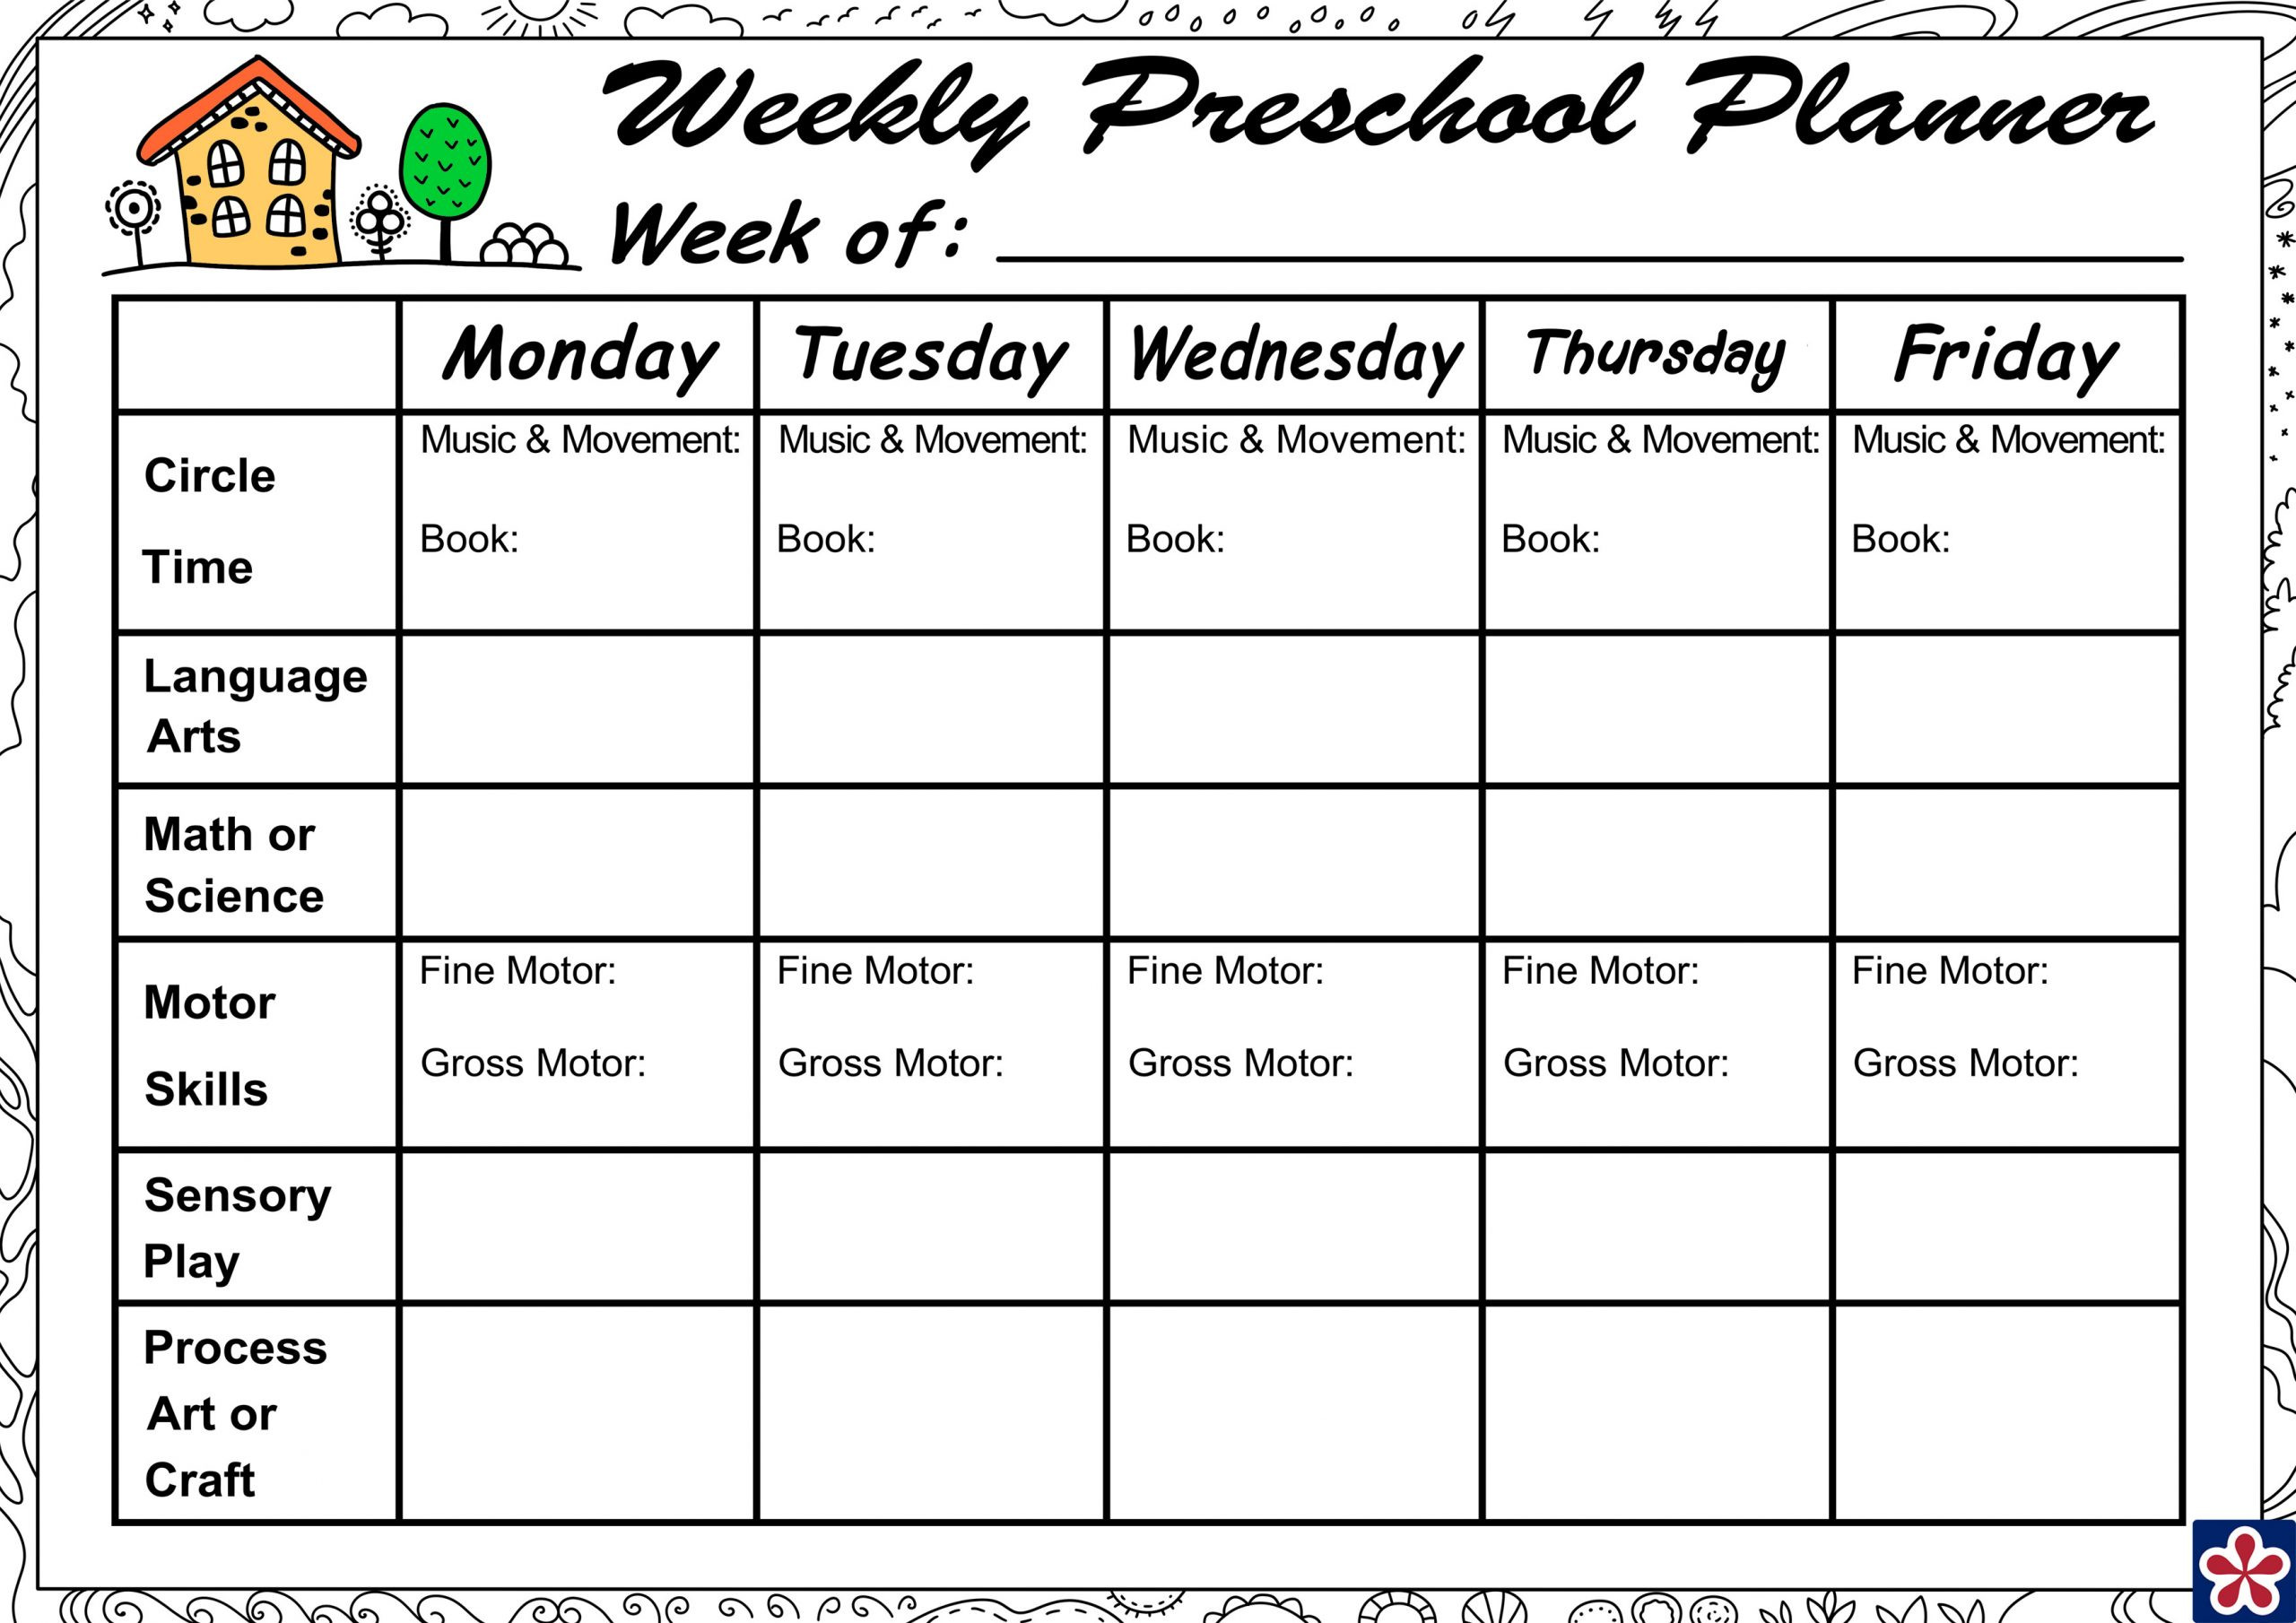 Free Preschool Weekly Lesson Plans Weekly Planner for Your Preschool Class